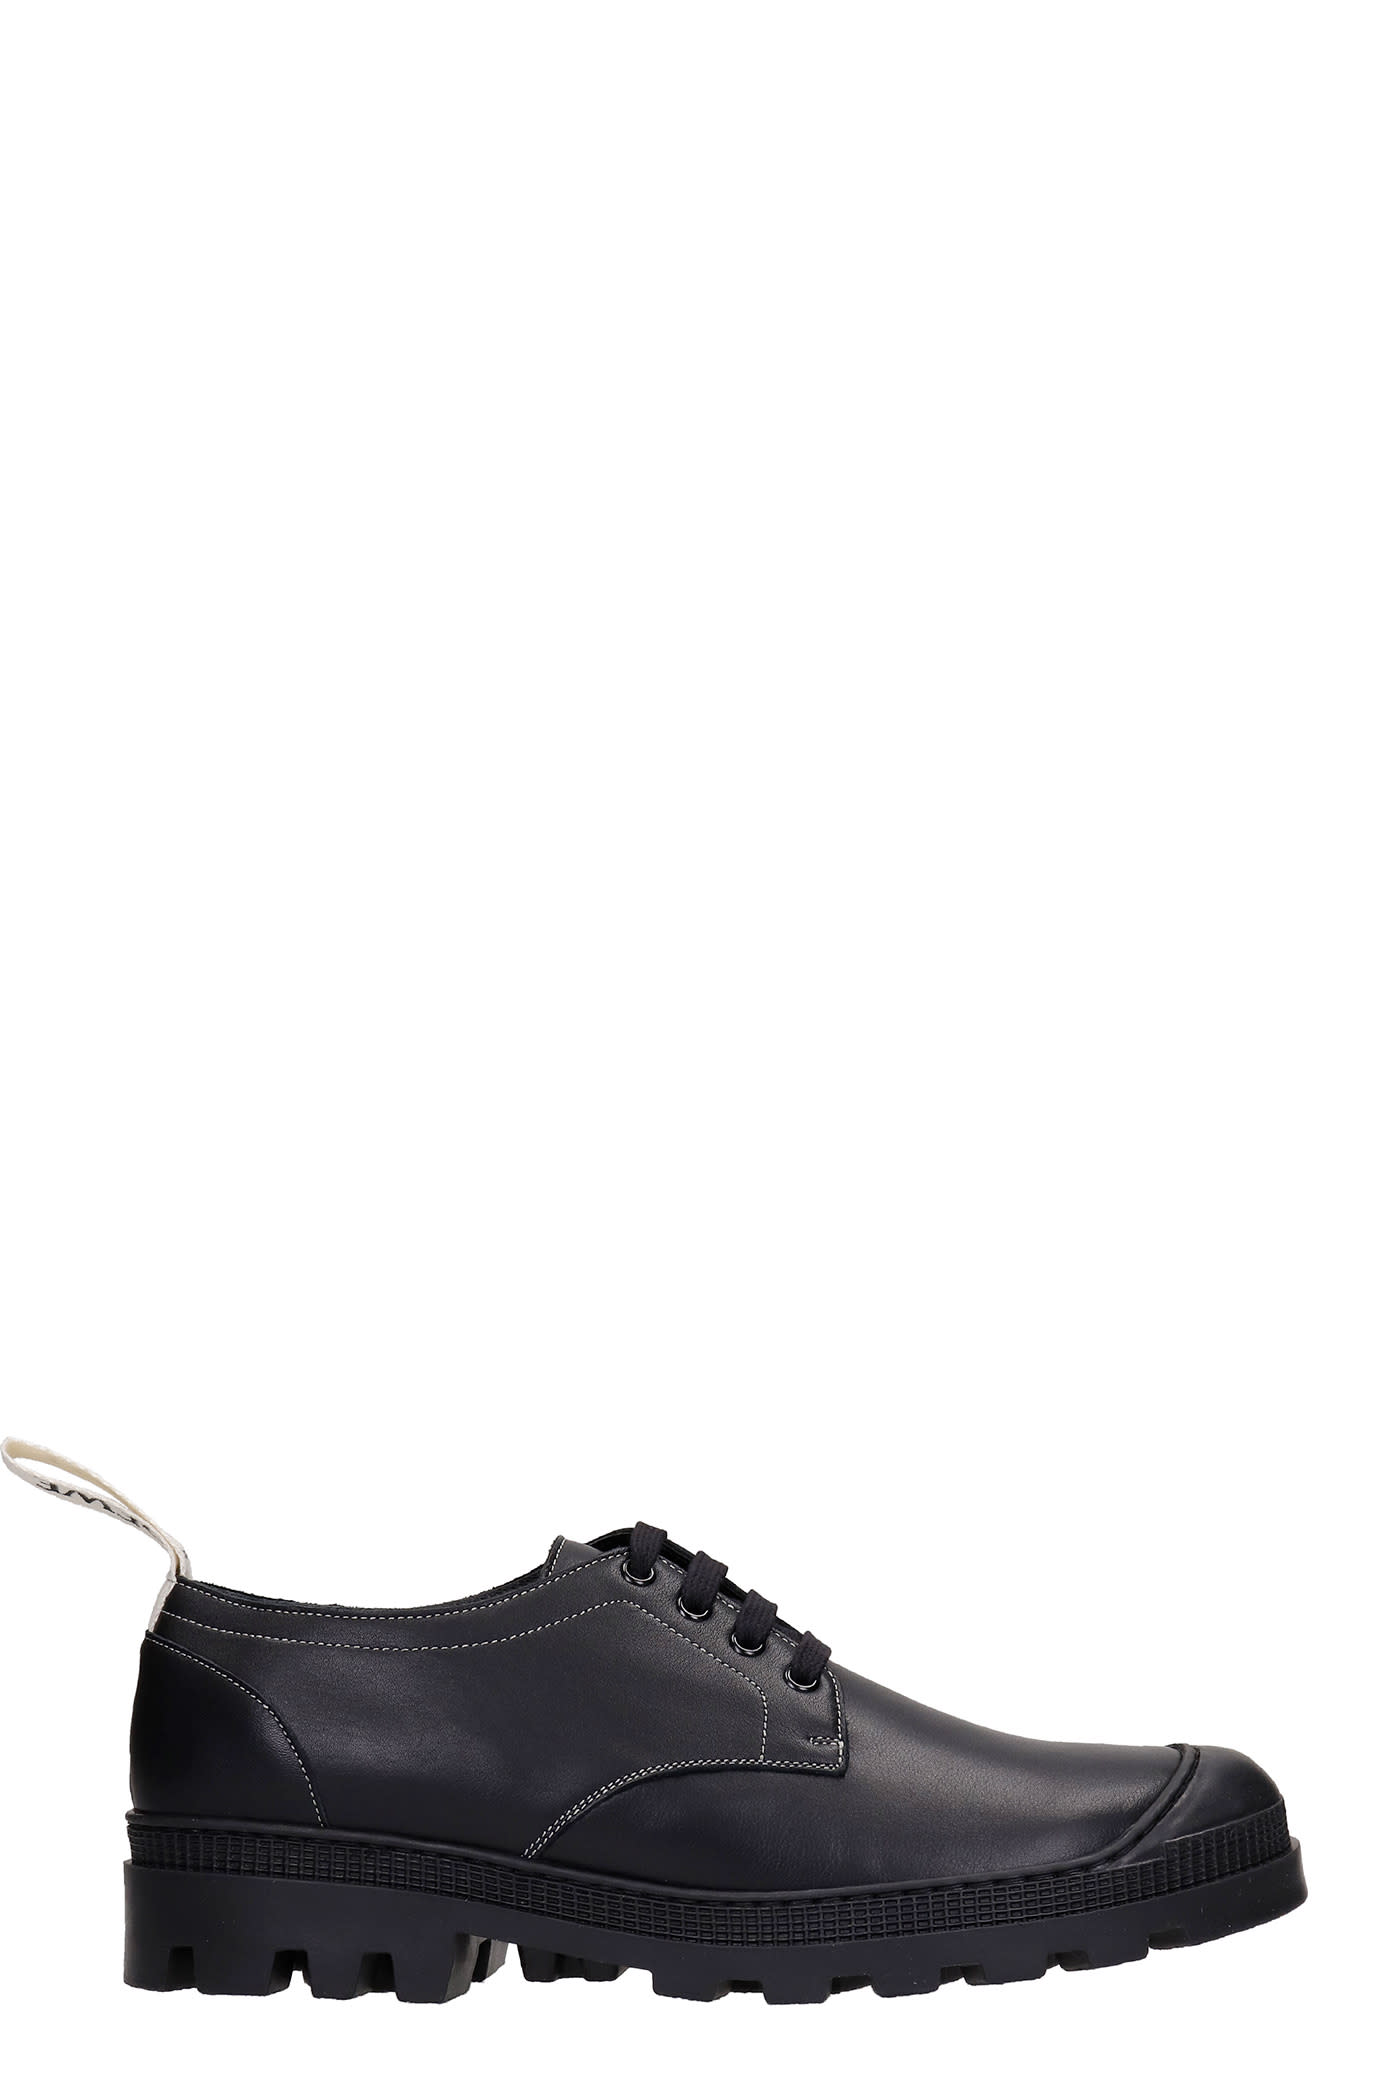 Loewe Lace Up Shoes In Black Leather